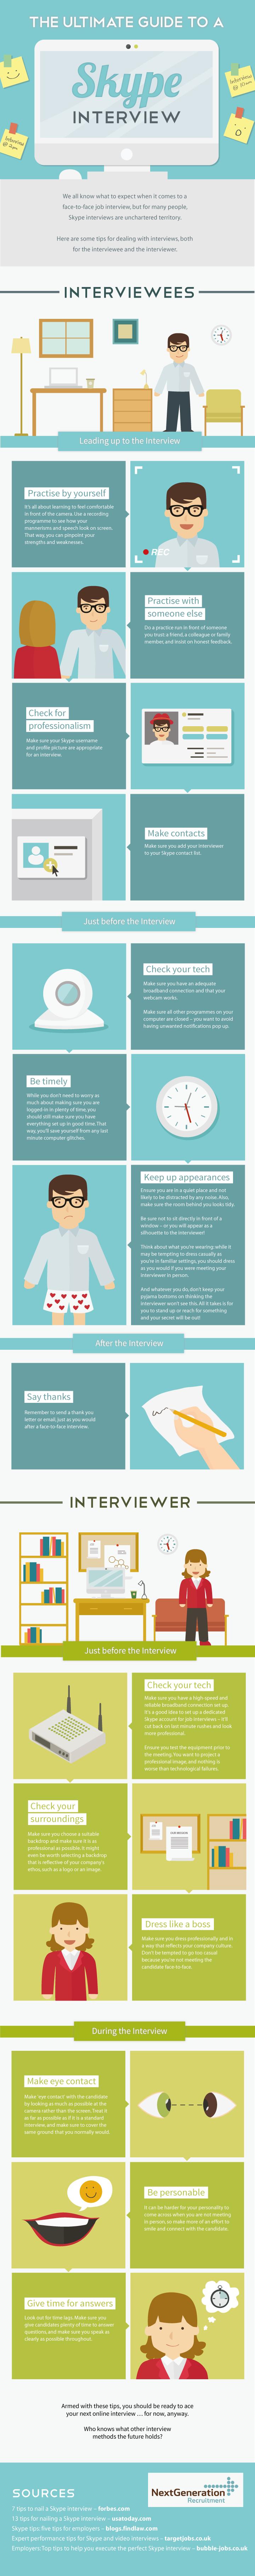 the-ultimate-guide-to-a-skype-interview-infographic